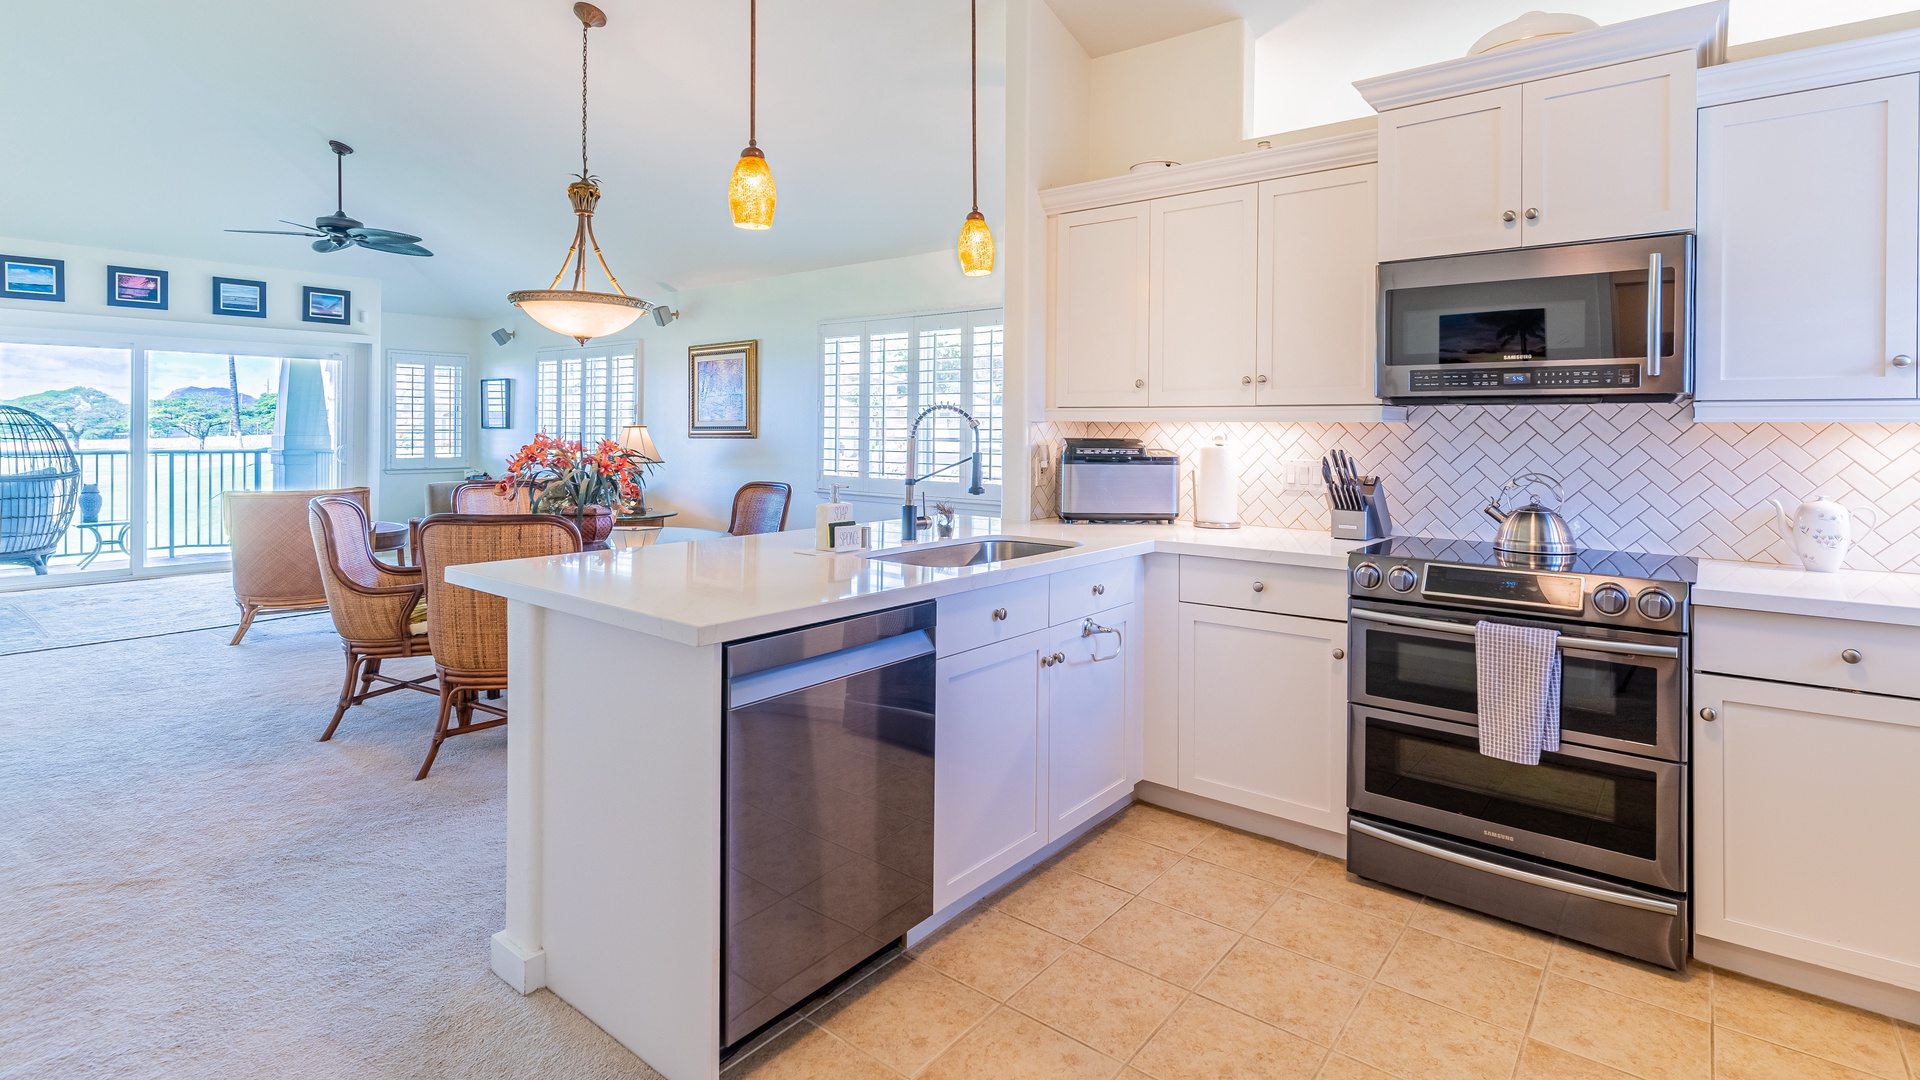 Kapolei Vacation Rentals, Kai Lani 20C - Every amenity a chef needs for the next culinary adventure.